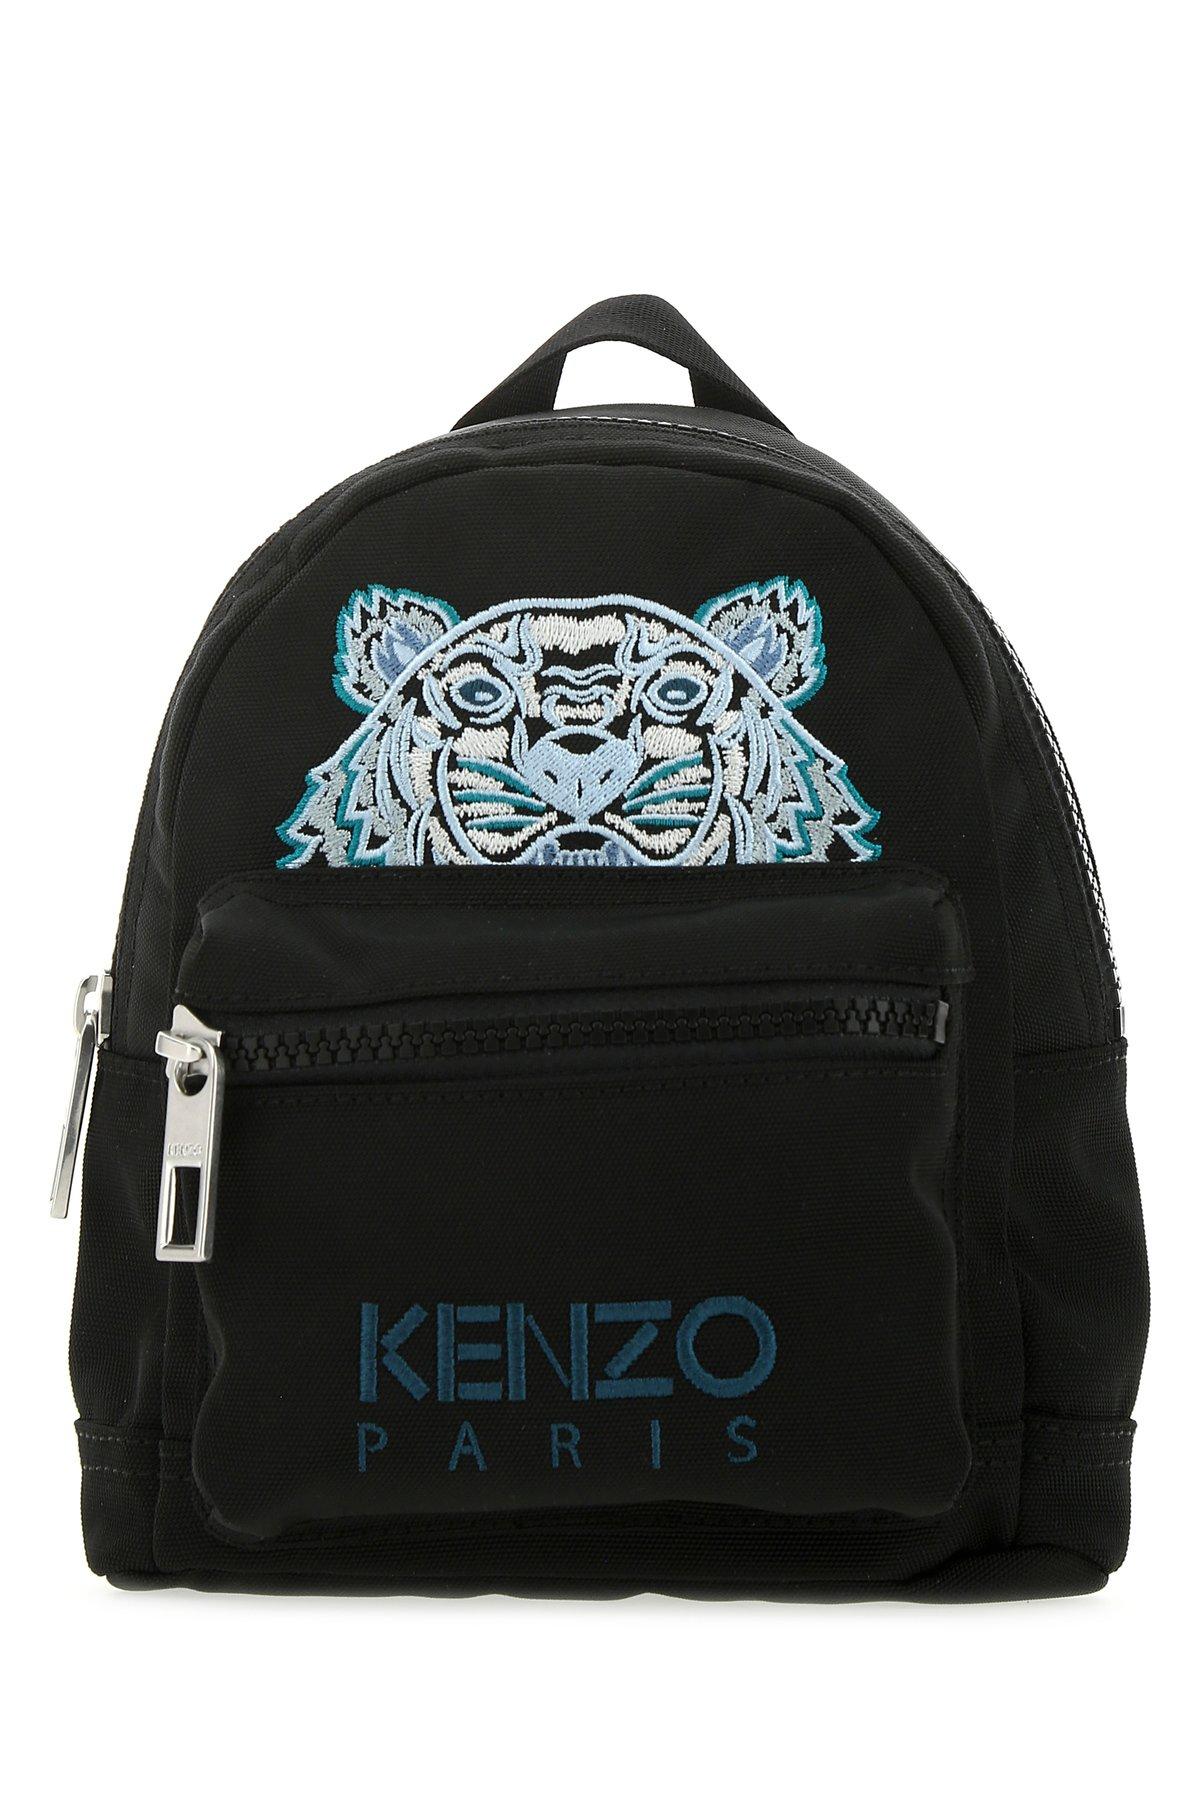 KENZO Synthetic Mini Kampus Tiger Backpack in Black for Men - Lyst